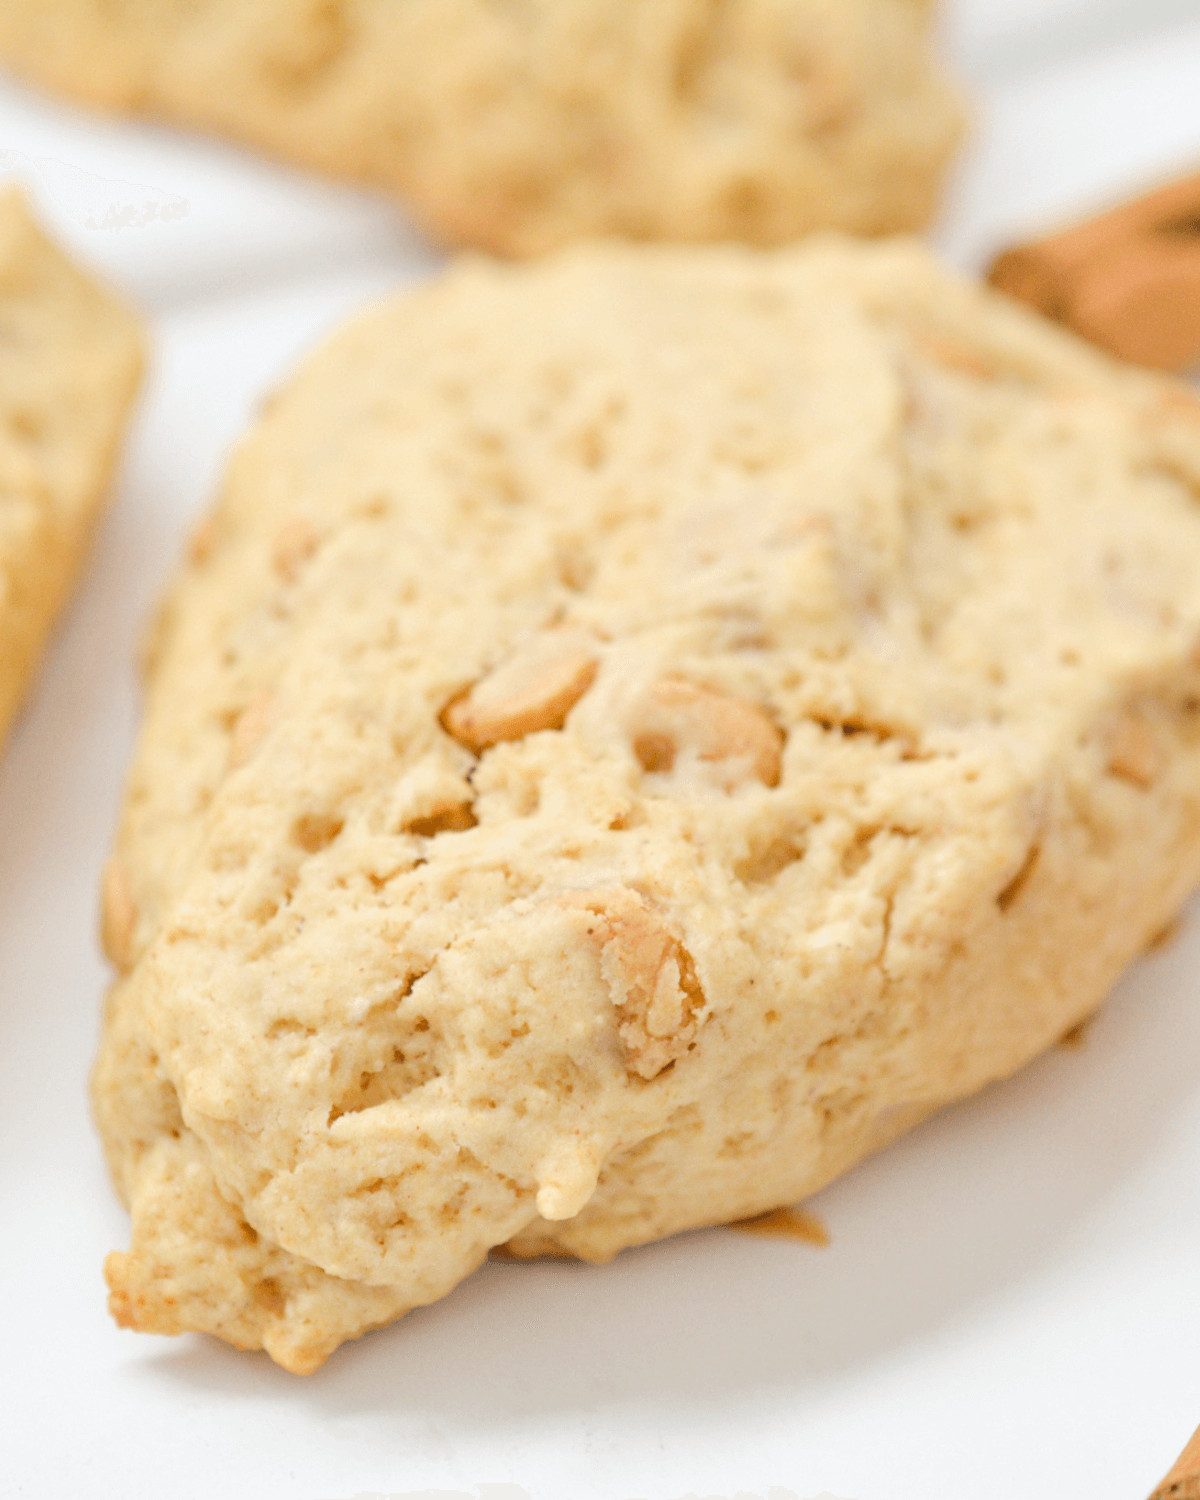 A close up on the finished golden cinnamon chip scone.